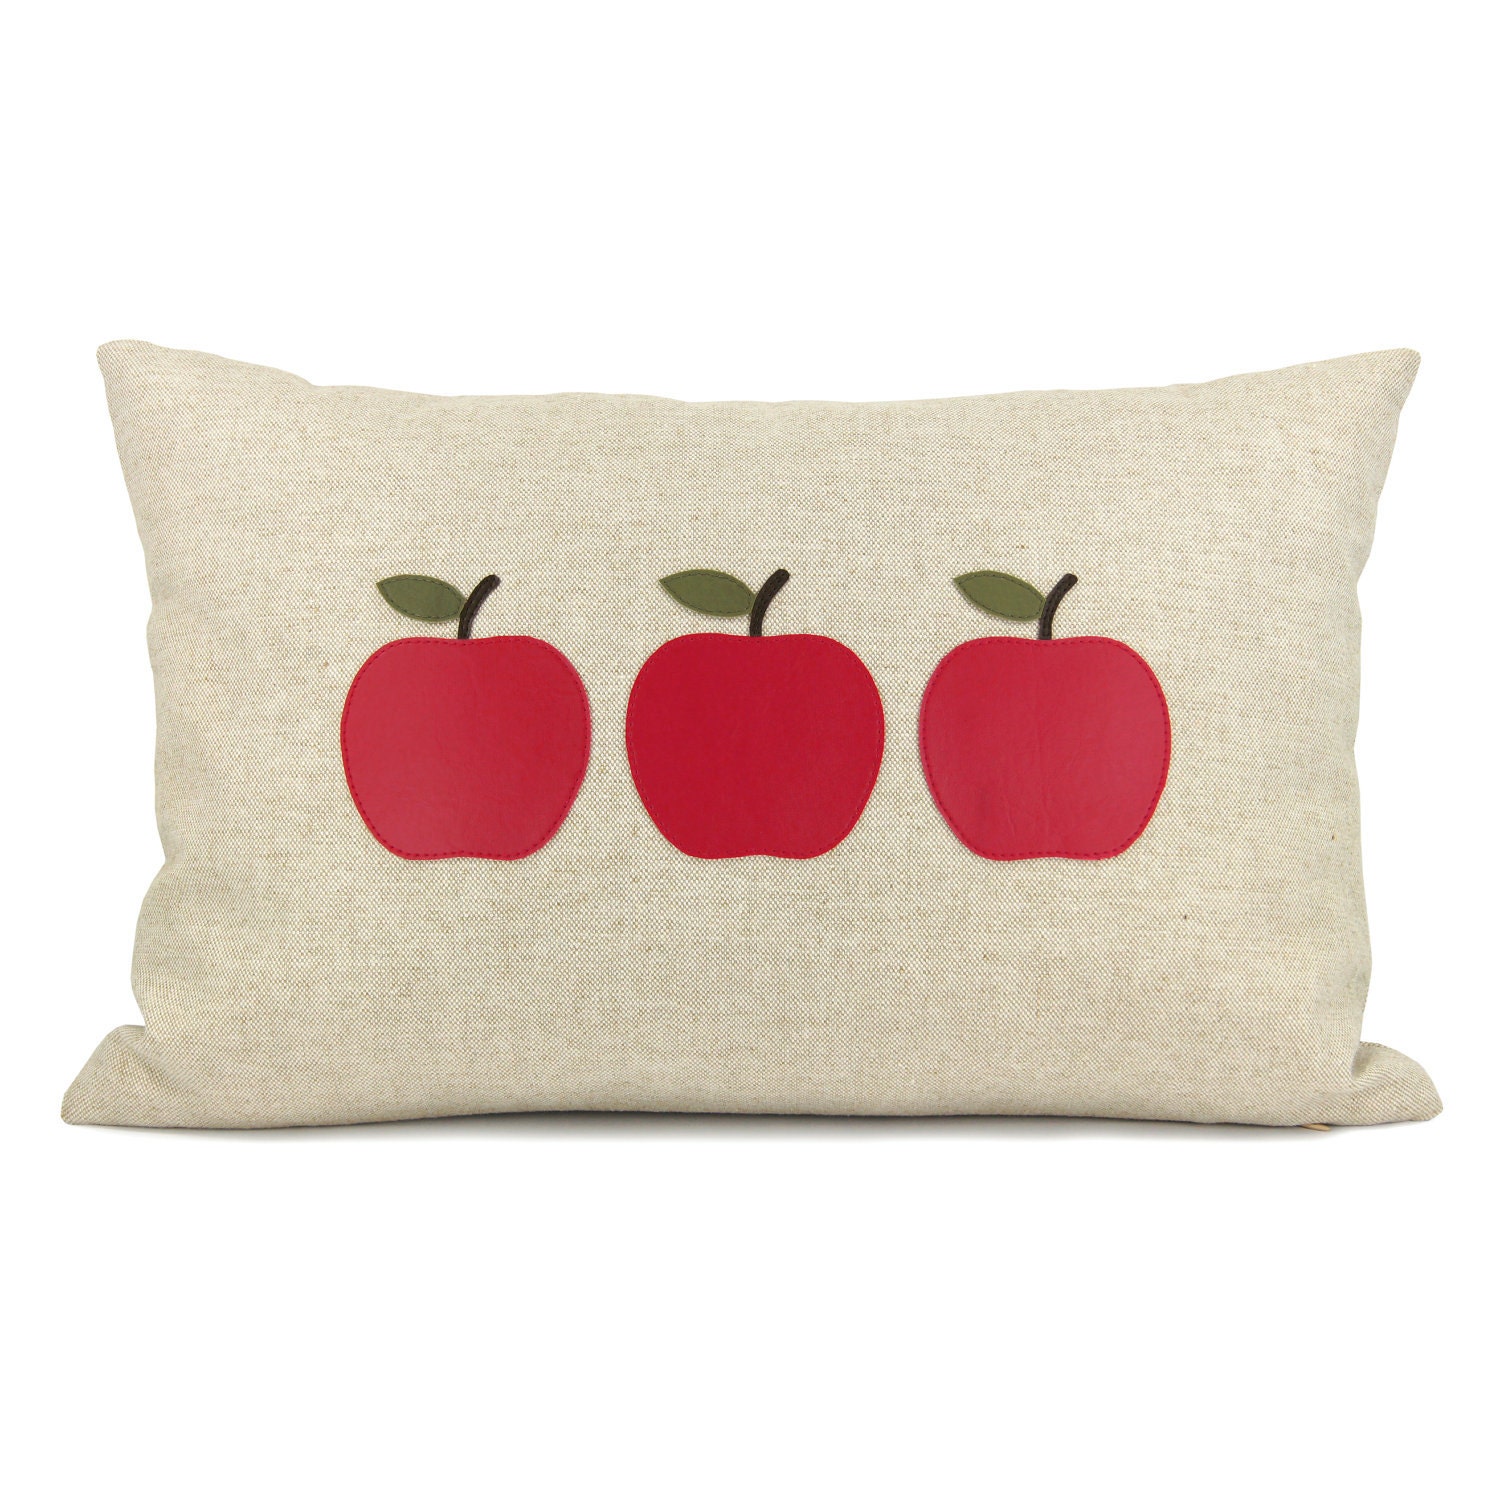 Personalized pillow case - Red or green apple appliques on your choice of fabric - 12x18 or 16x16 decorative pillow cover - ClassicByNature